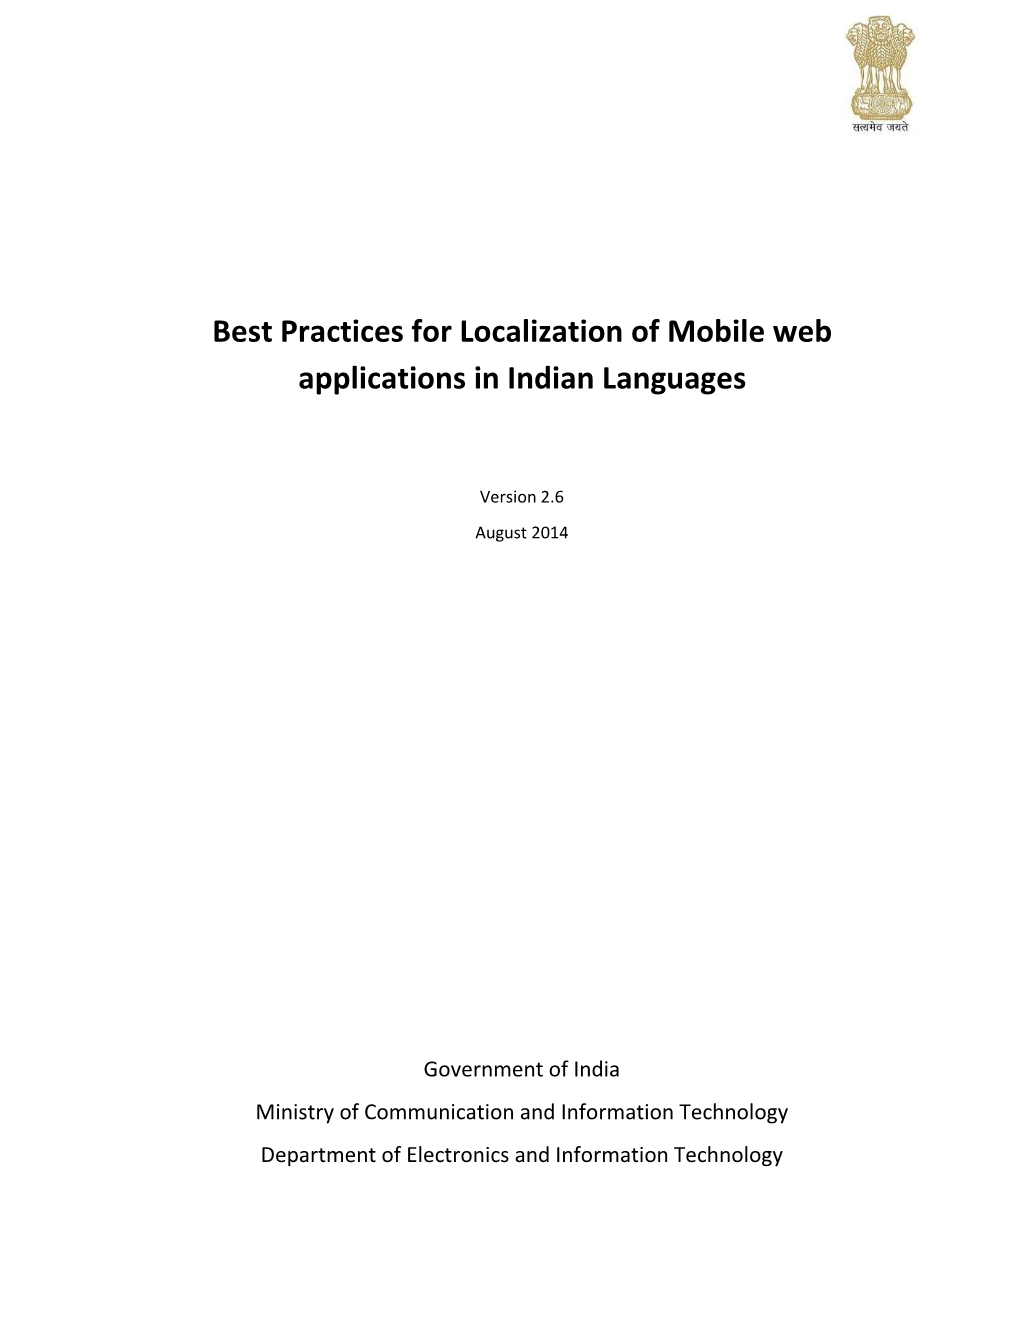 Localisation Guidelines